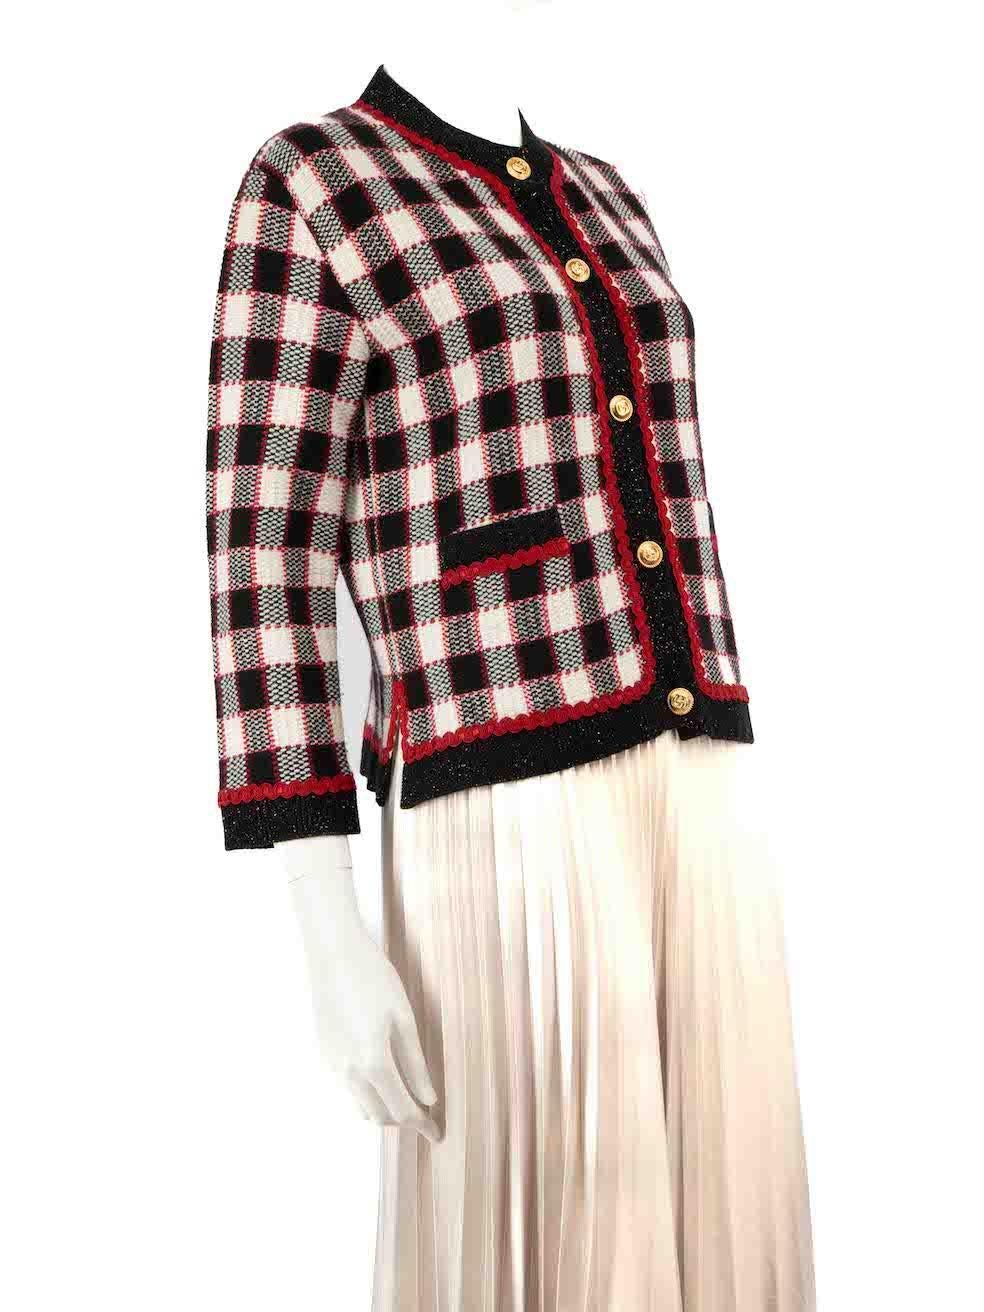 CONDITION is Very good. Minimal wear to cardigan is evident. Minimal wear to the front left pocket where a loose thread can be seen on this used Gucci designer resale item.
 
 
 
 Details
 
 
 Multicolour- black, white, red
 
 Wool
 
 Knit cardigan
